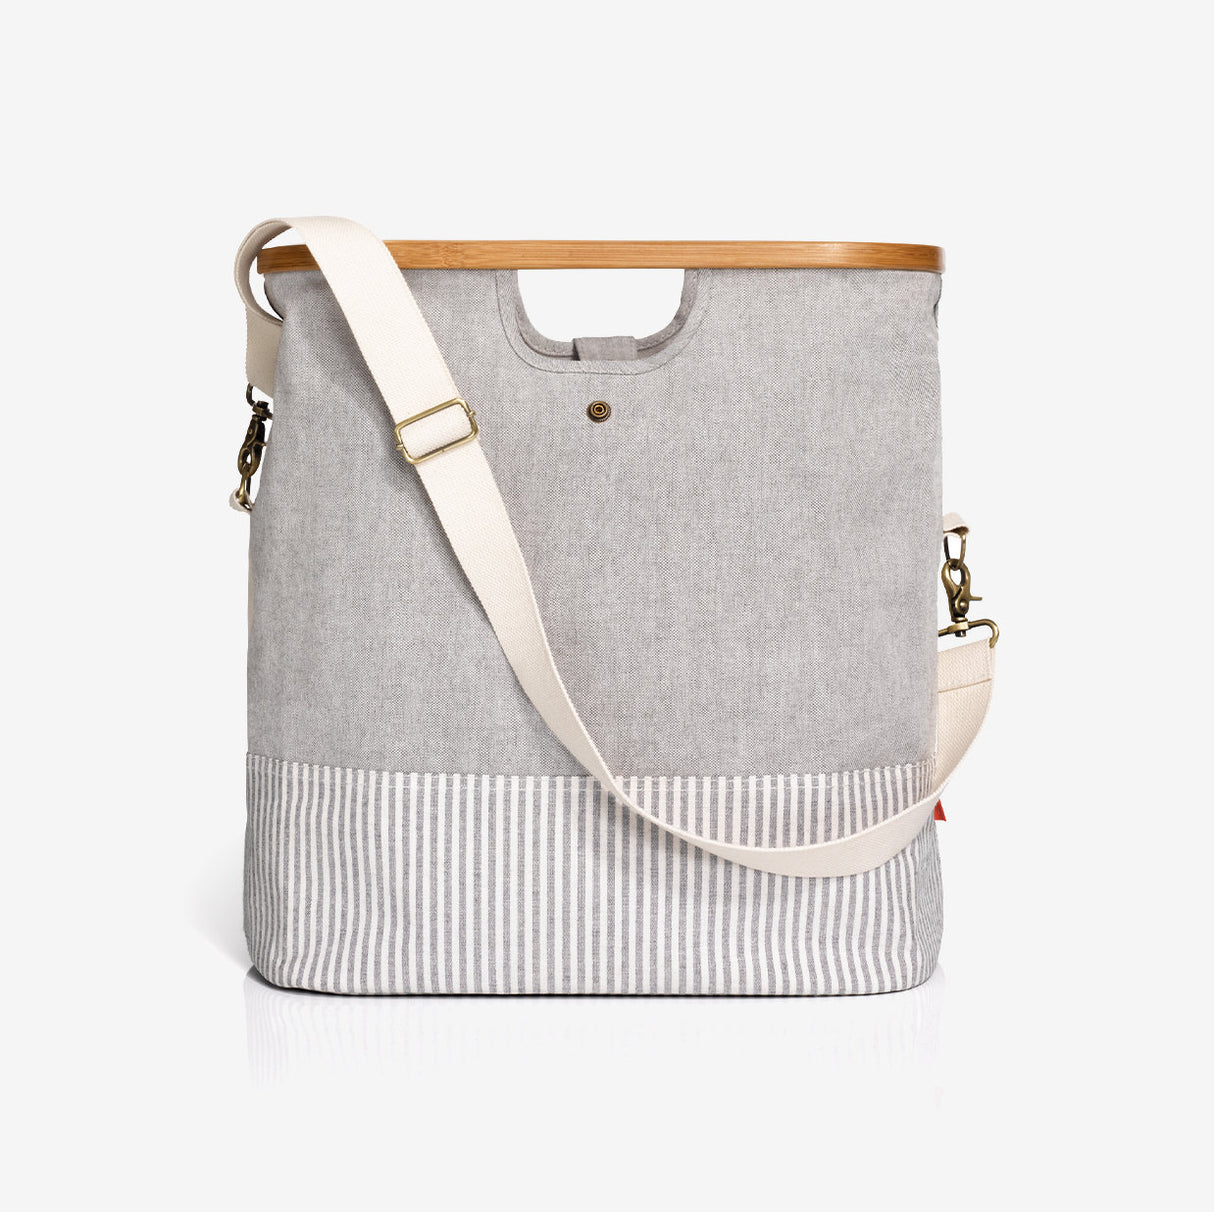 Travel bags, canvas and bamboo in gray - Prym 612560